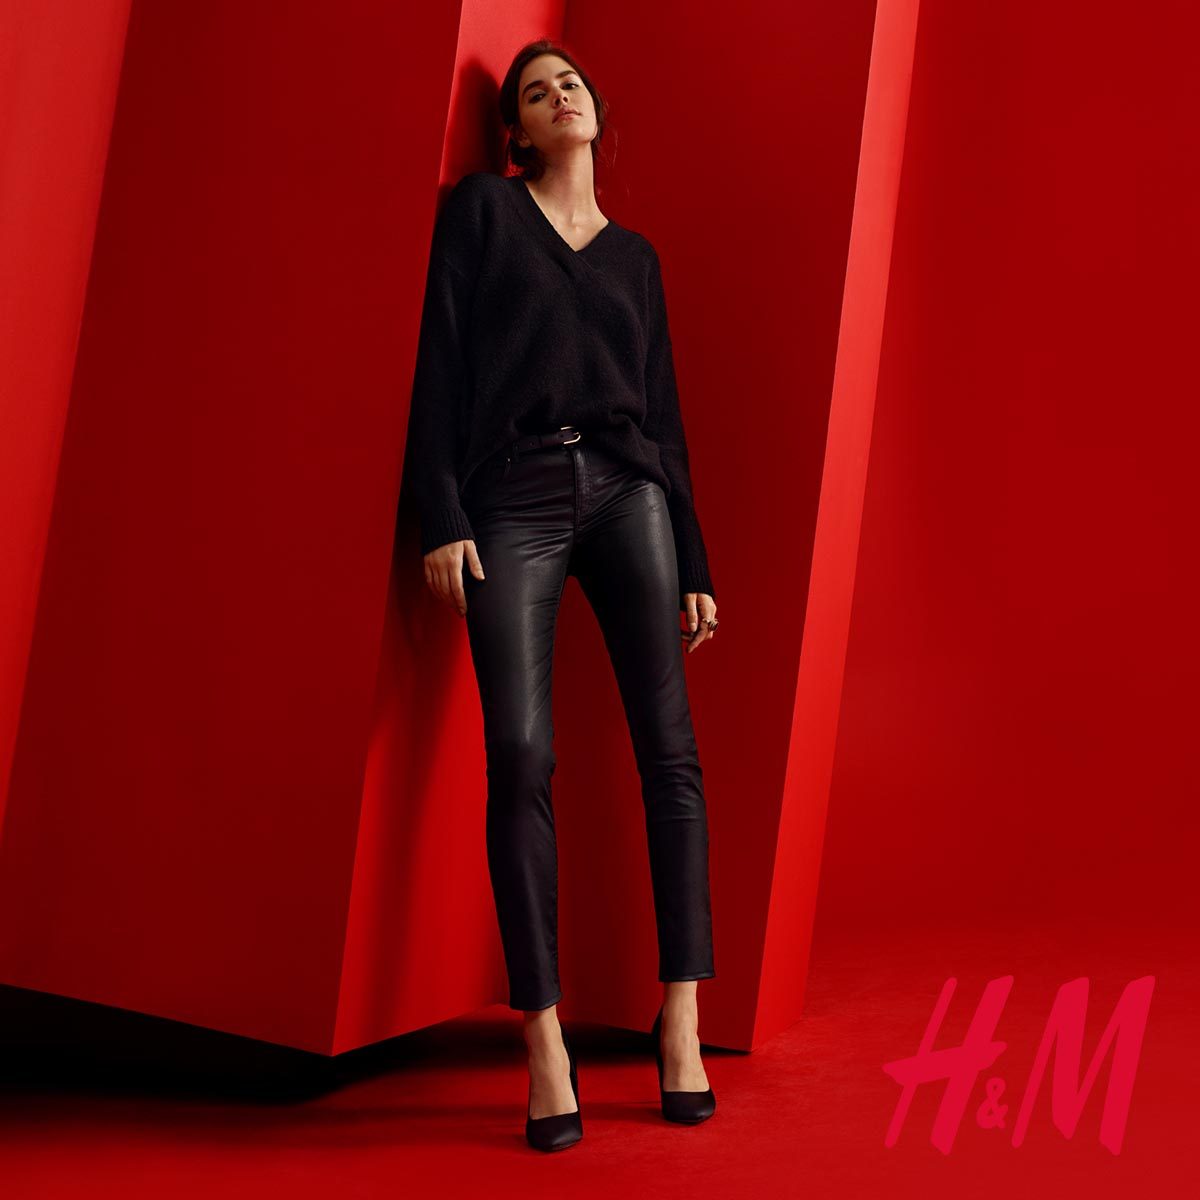 H&M’s Black Friday Sale Up to 70 off on their new collection and more